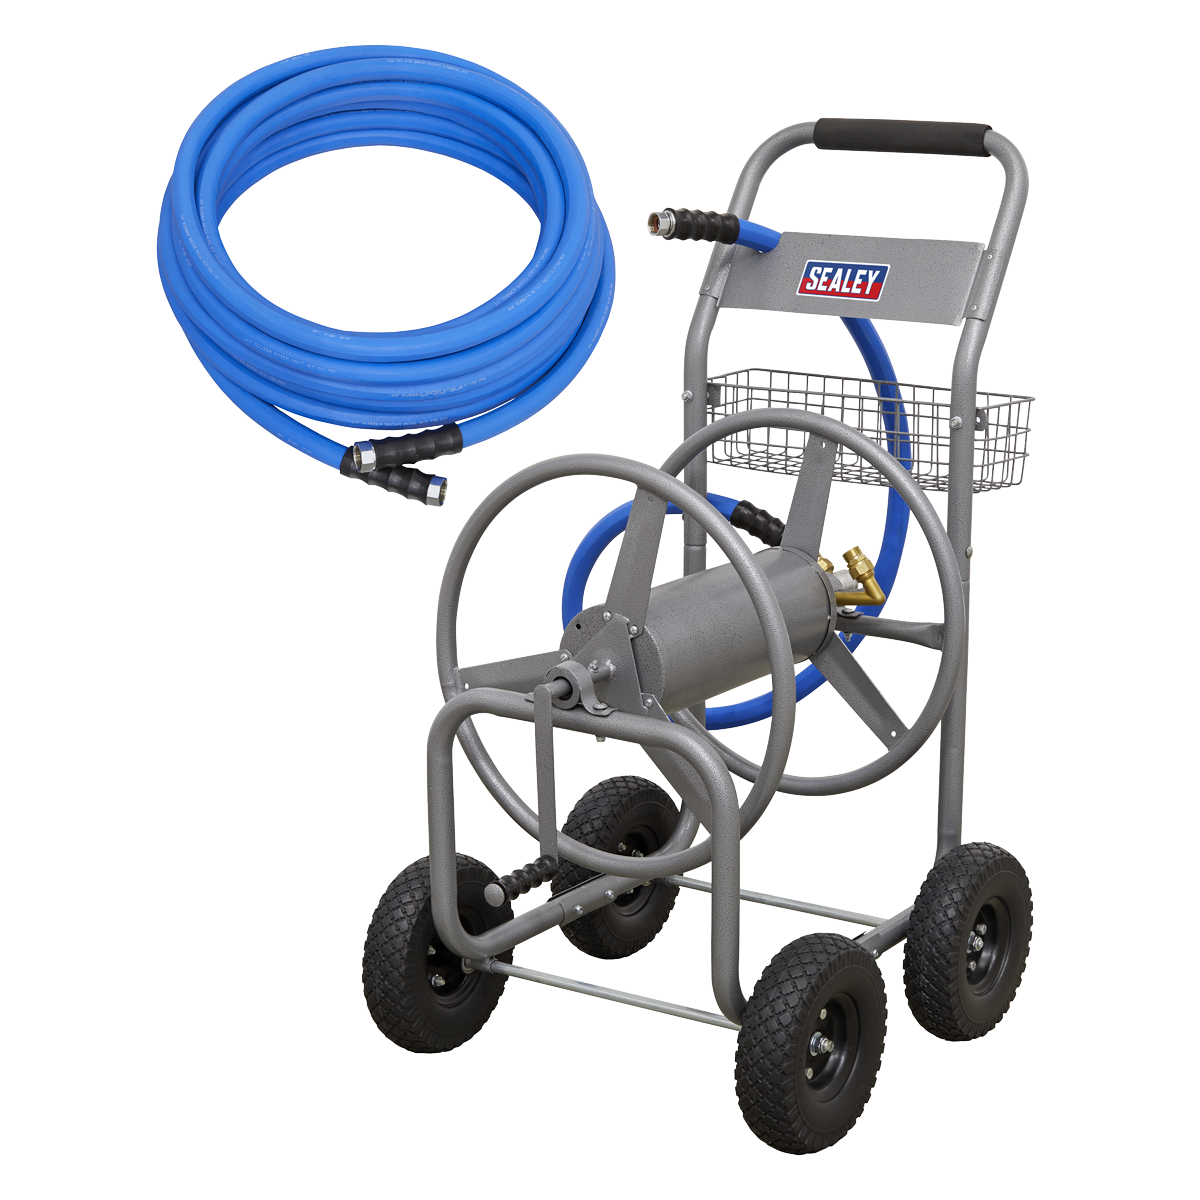 Heavy-Duty Hose Reel Cart with 5m Heavy-Duty Ø19mm Hot & Cold Rubber Water Hose - HRKIT5 - Farming Parts